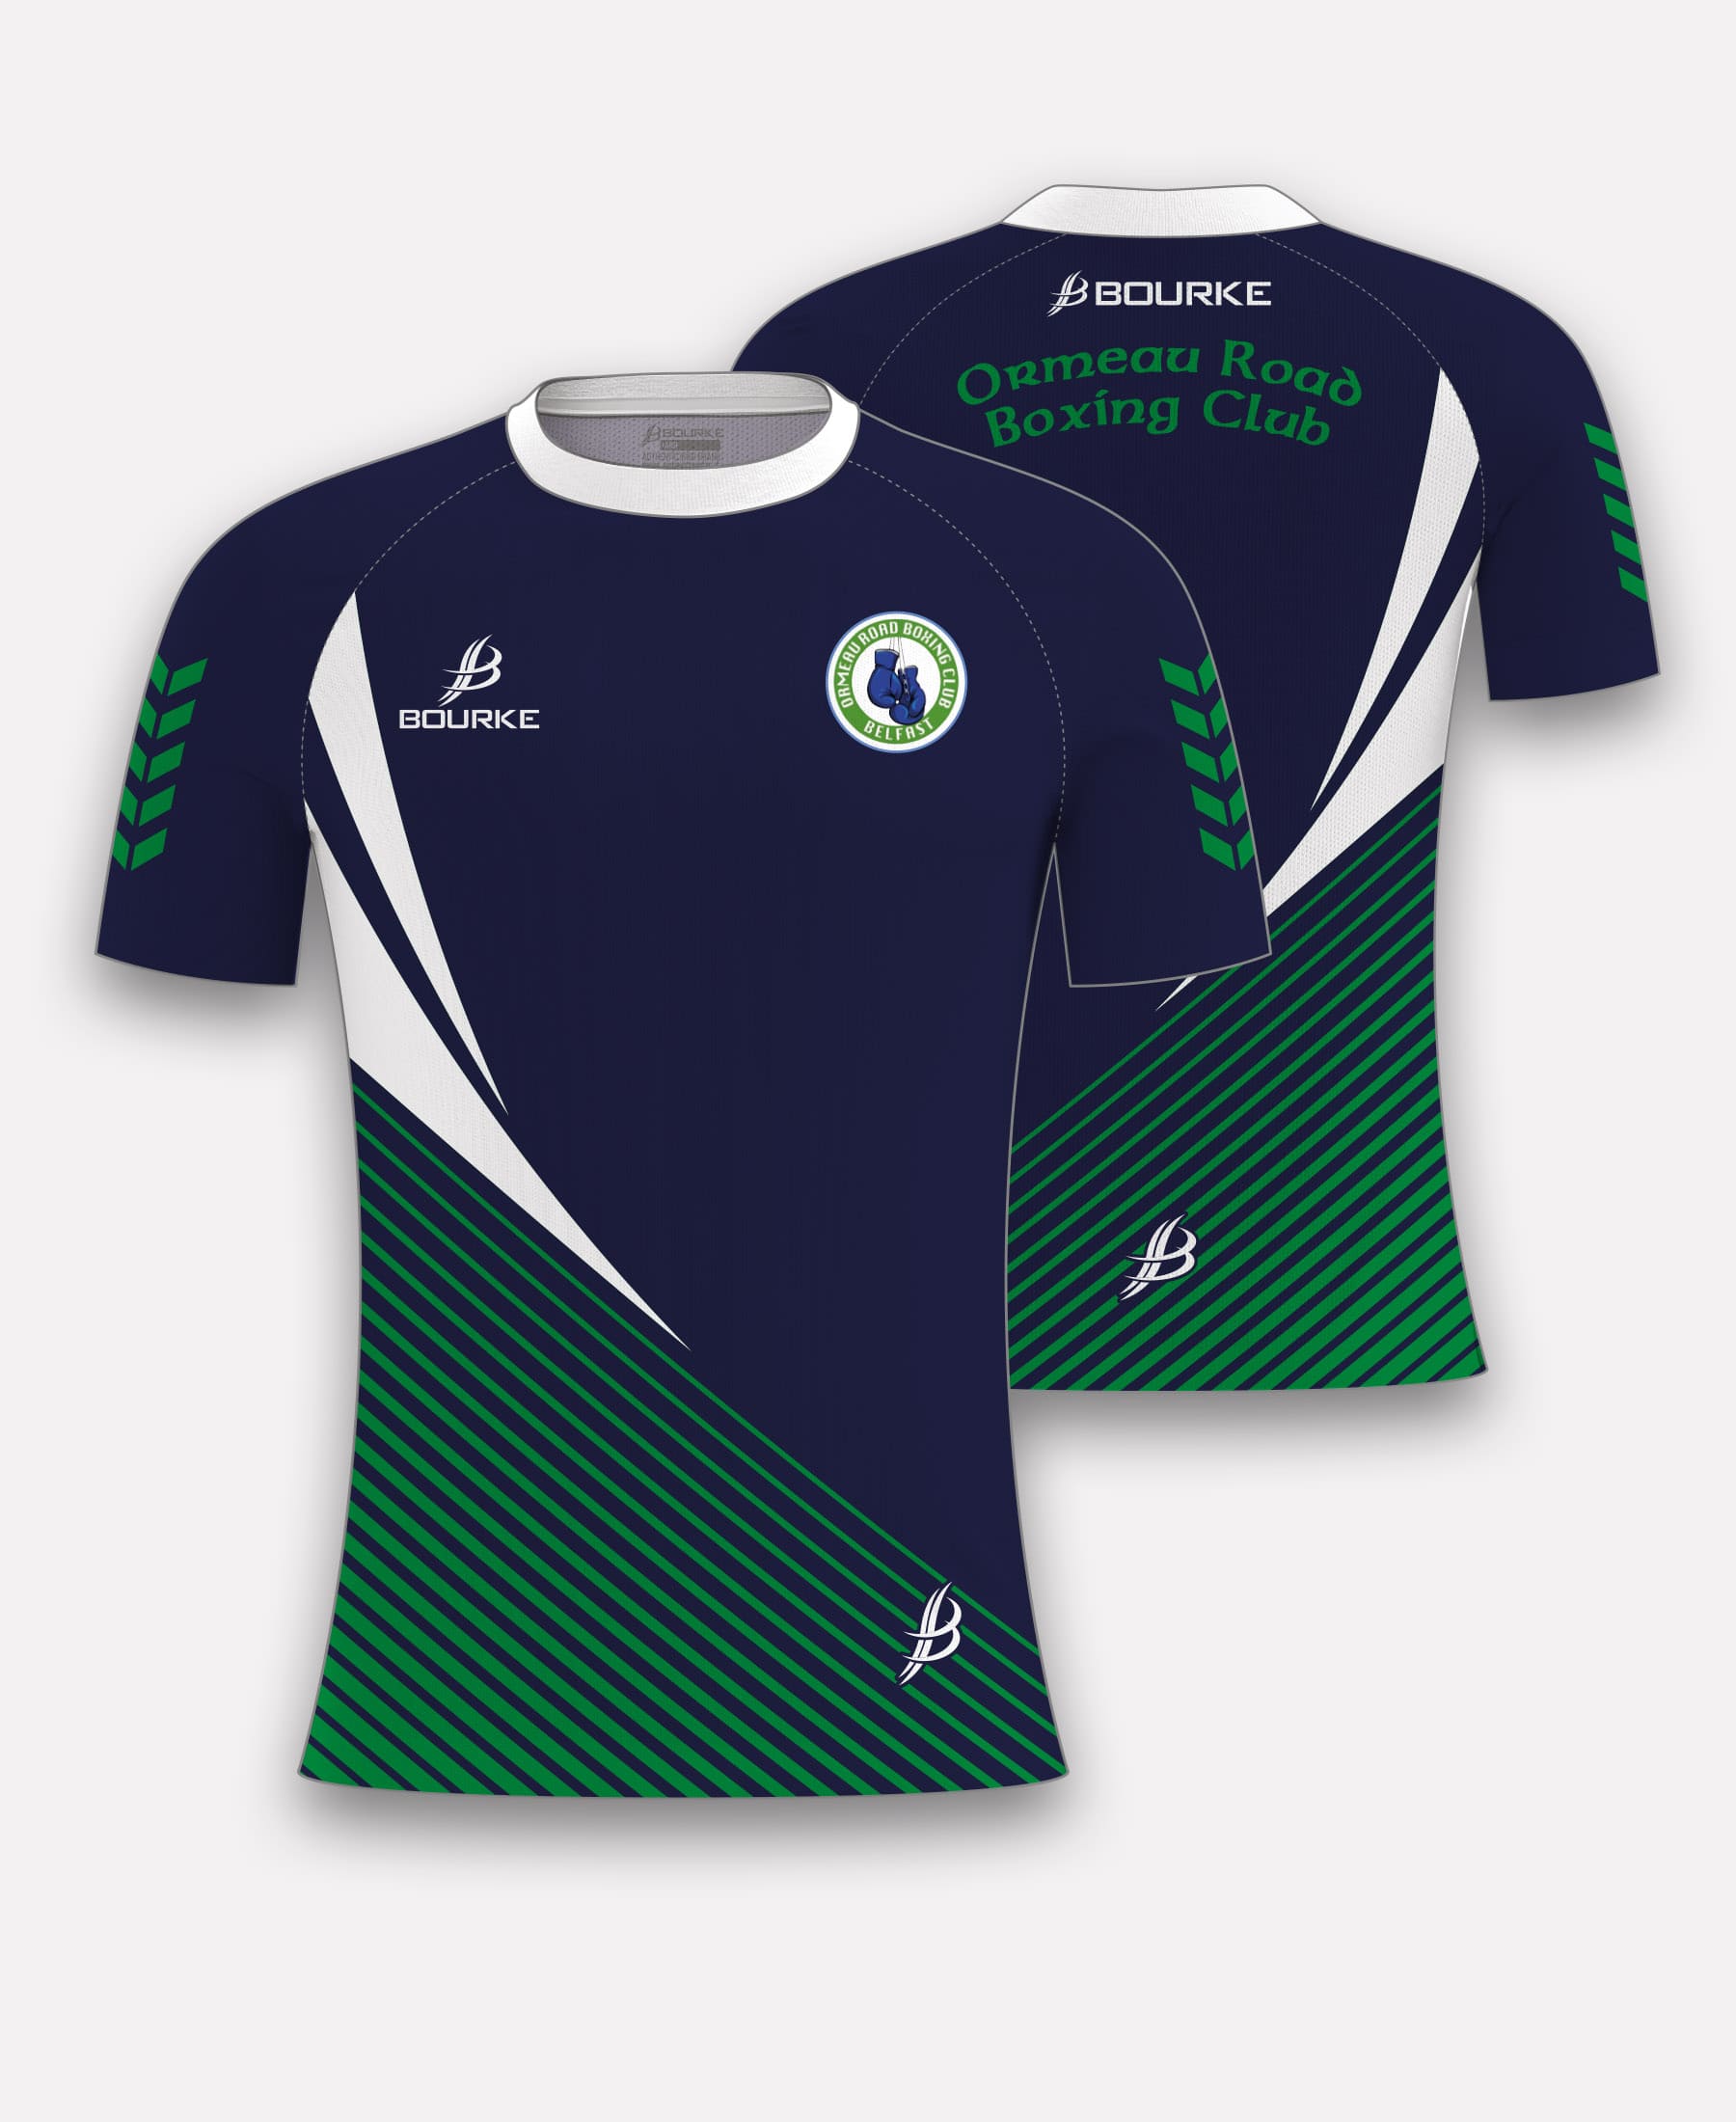 Ormeau Road Boxing Club Jersey